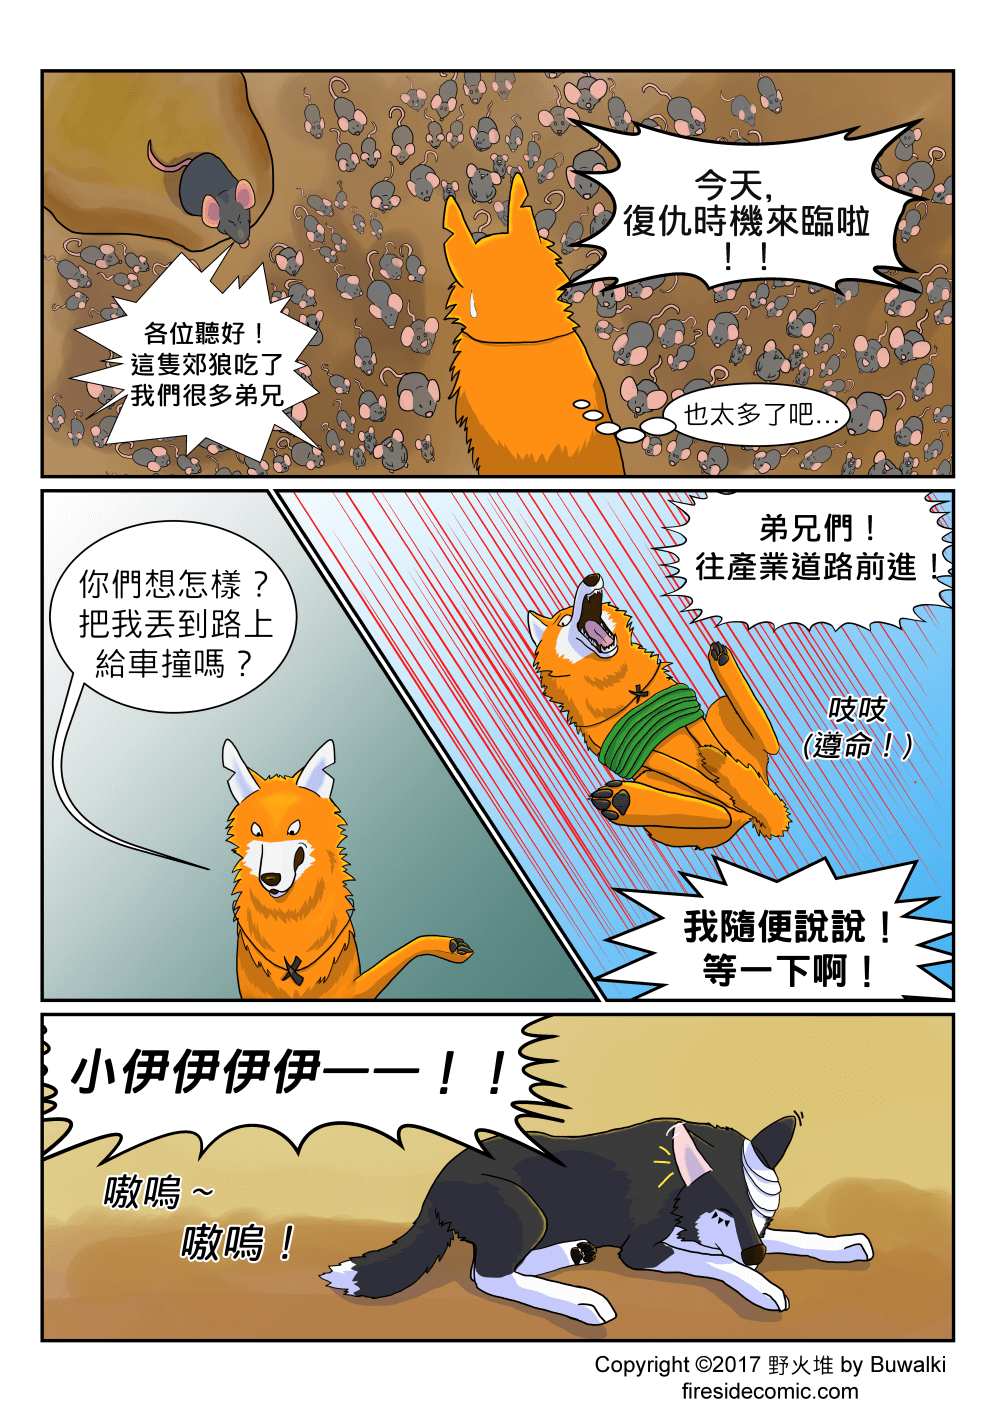 RatTrouble03